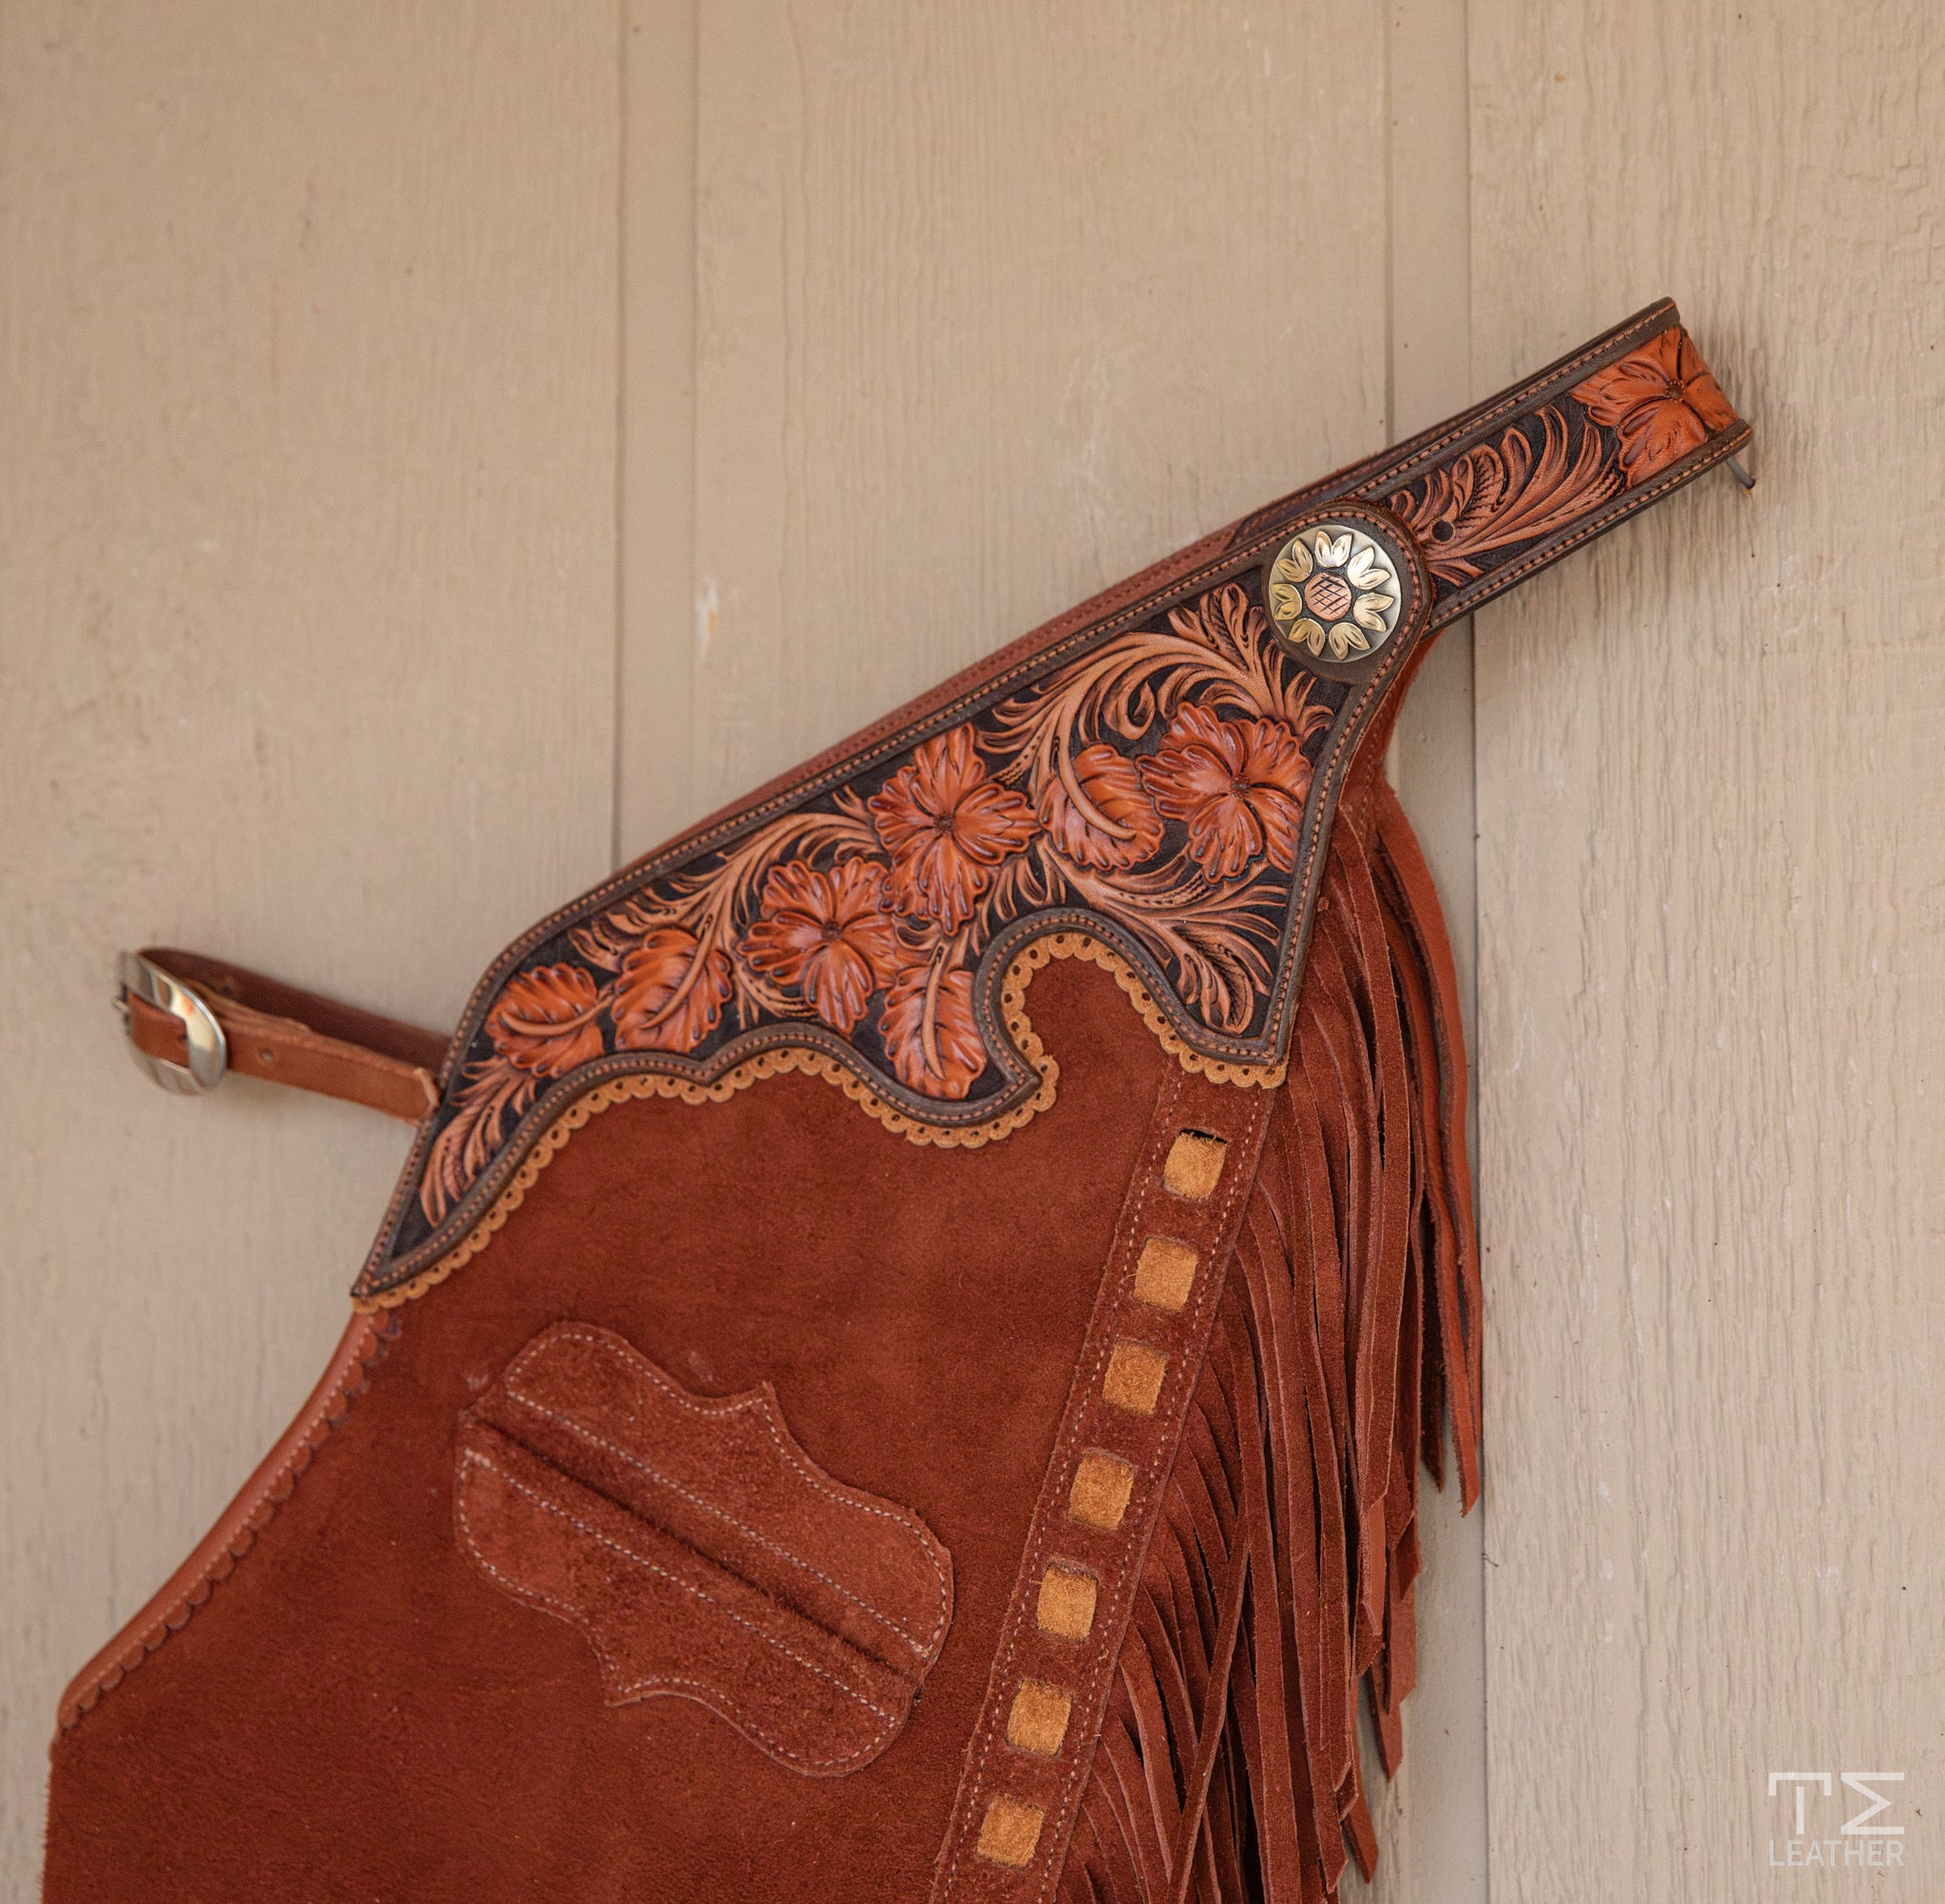 Rust Roughout Chaps w/ Chocolate, Medium Brown, & Rust Floral Yokes and Pocket